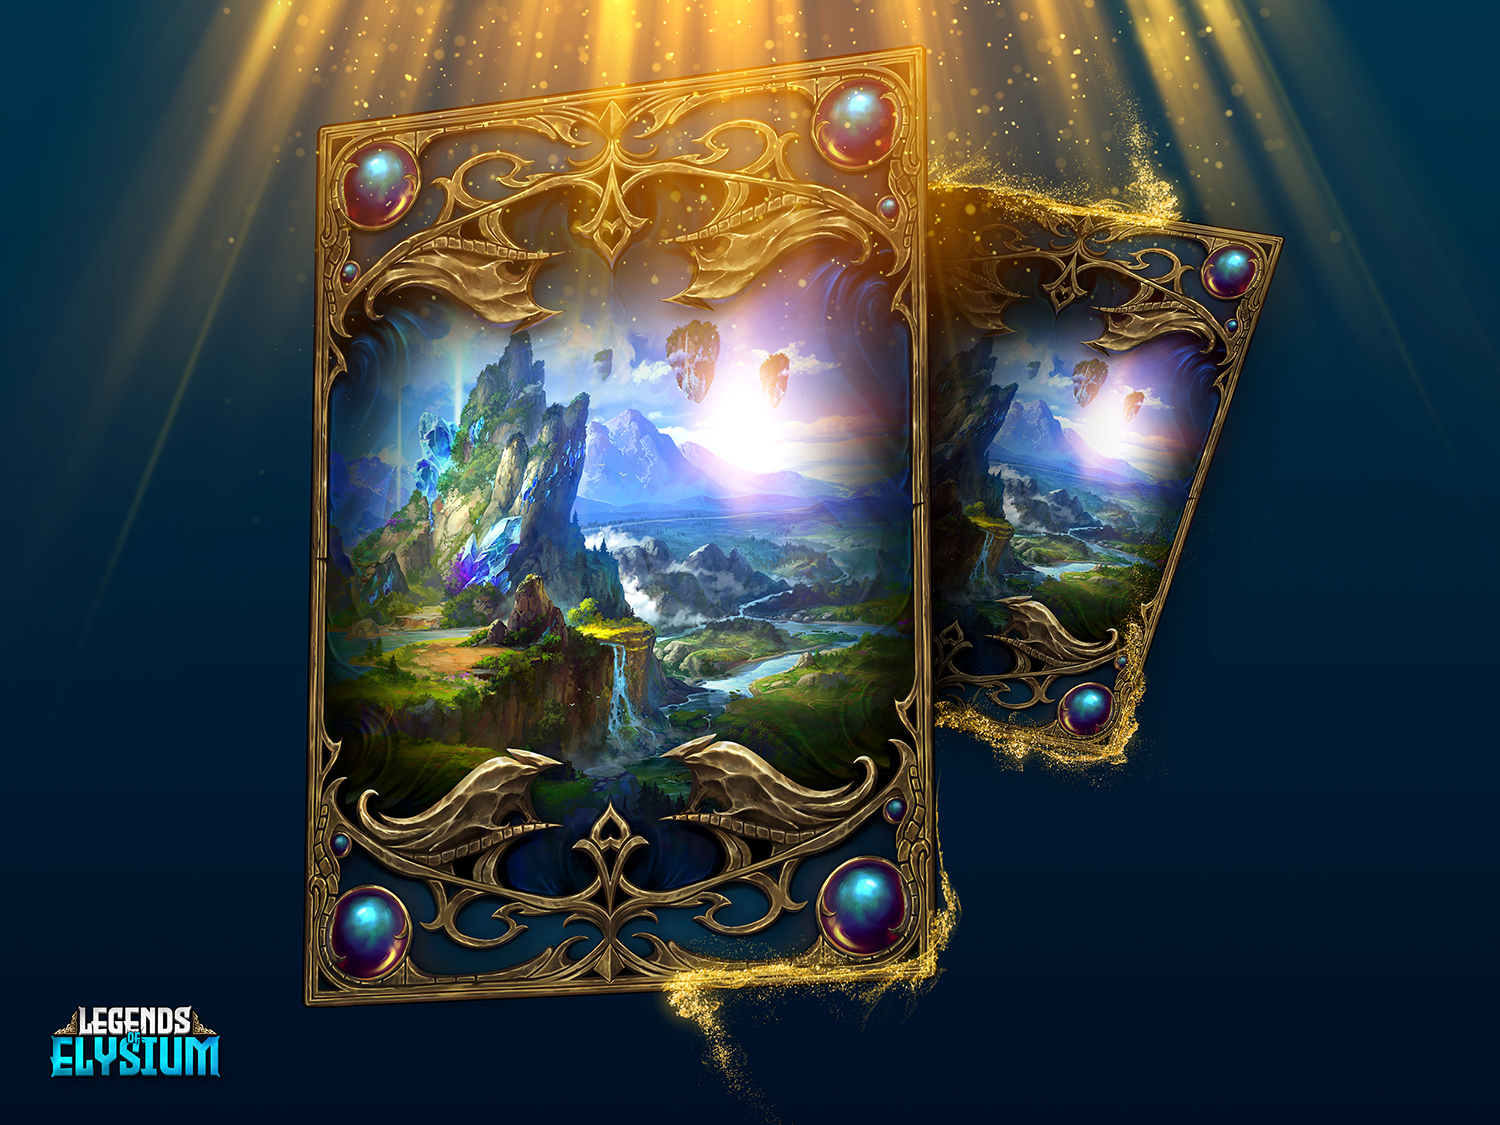 Achievement Rewards - players who reach specific milestones, complete certain tasks, or climb specific ranks will be rewarded with exclusive card backs that commemorate their efforts.